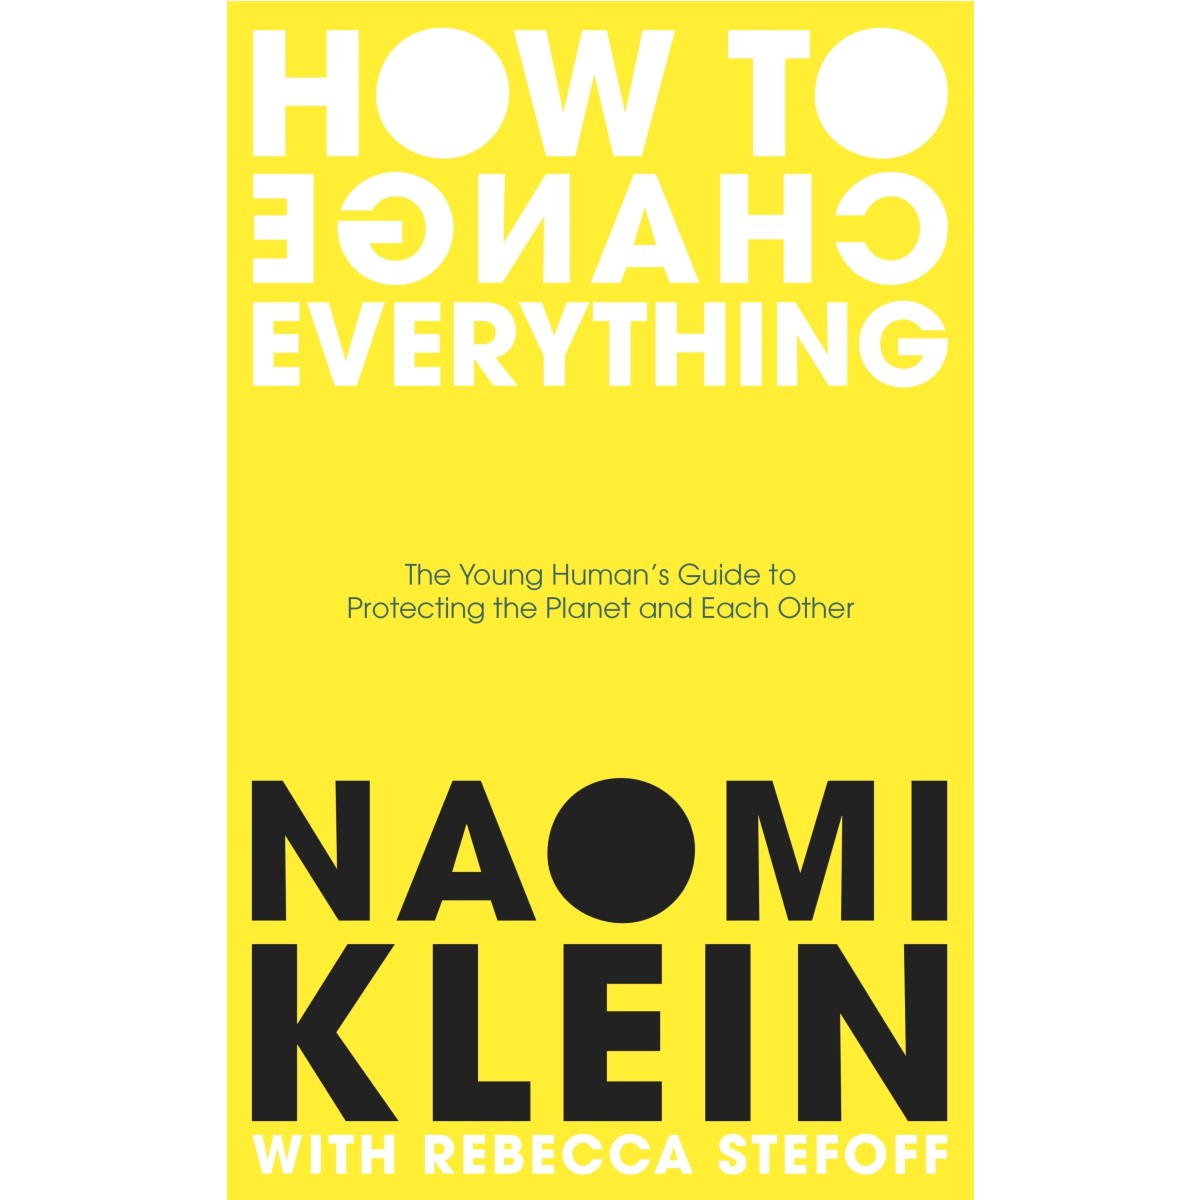 this changes everything by naomi klein